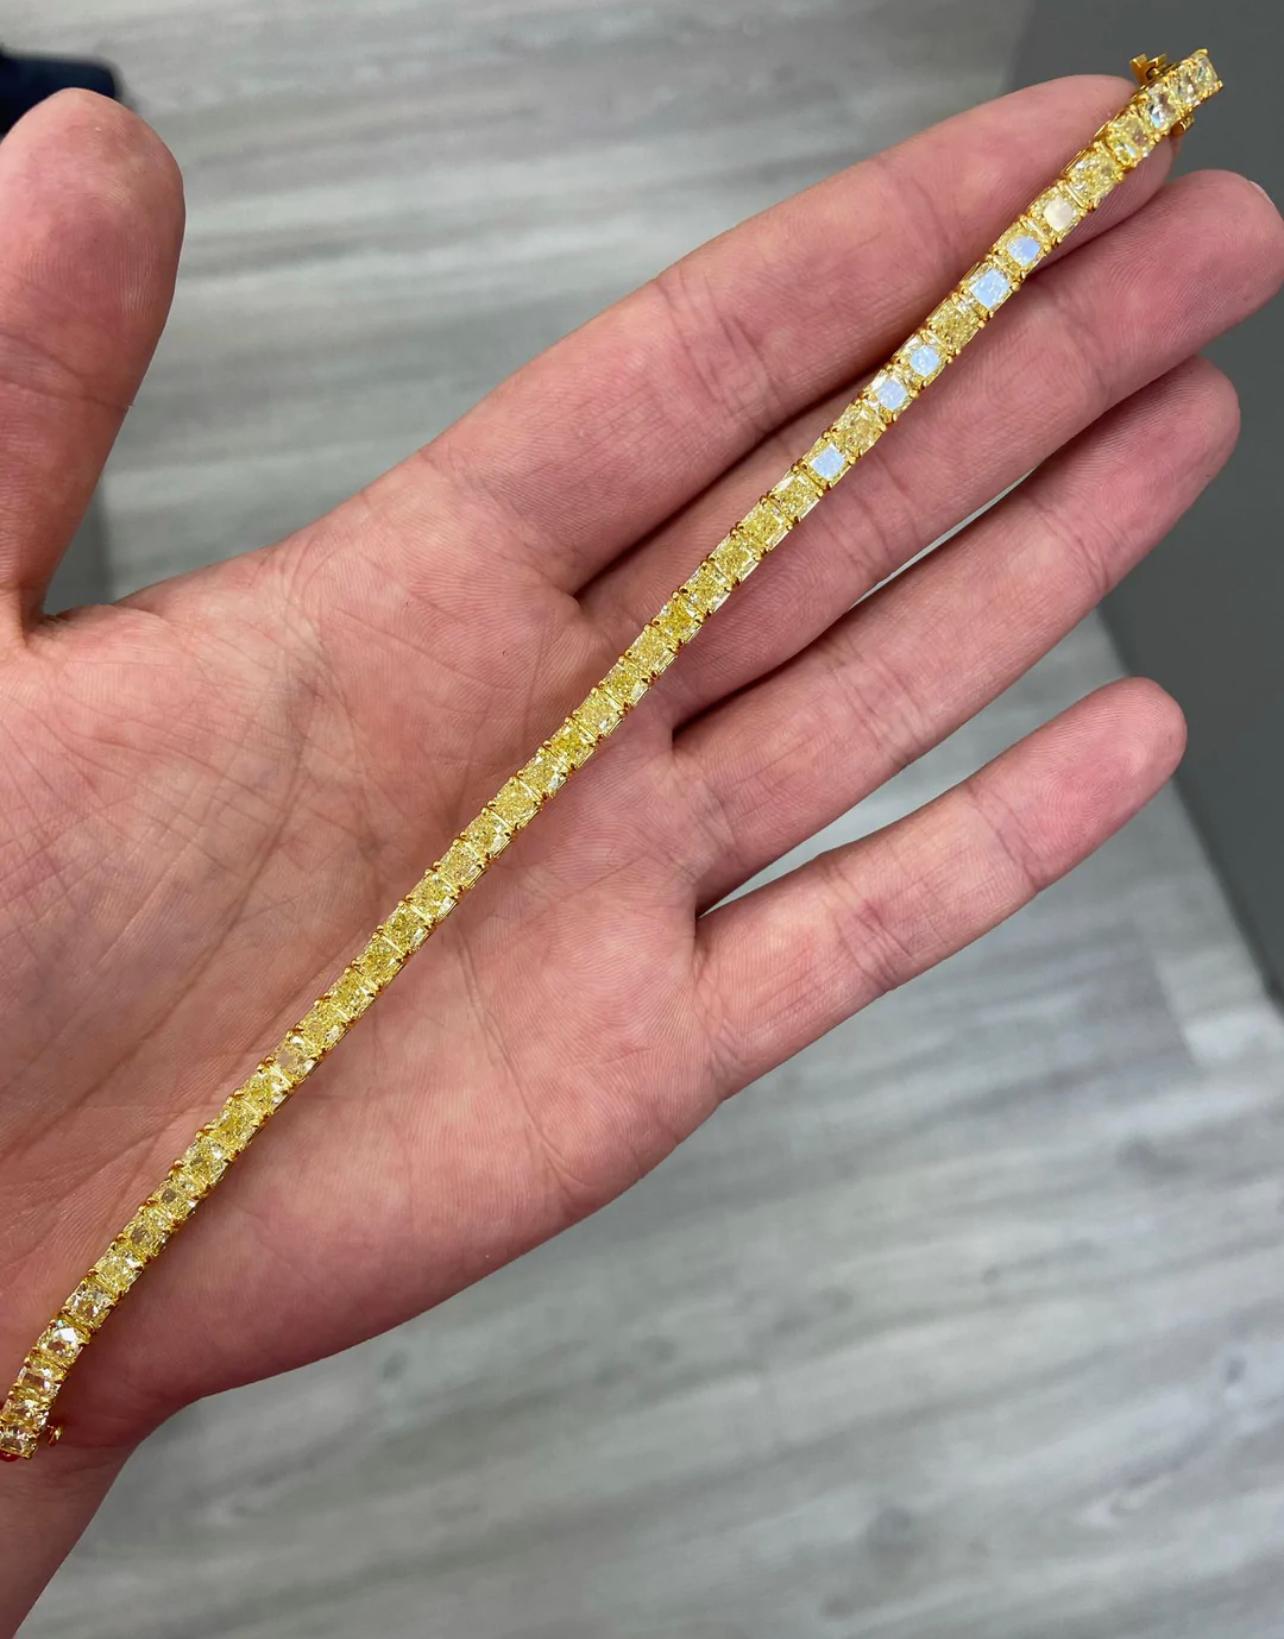 Our gorgeous and well made Tennis bracelet with meticulously matched Fancy Intense Yellow Cushions 16.08ct 43 pieces
VS quality
Set in 18kt Yellow Gold
4 prong style
7 inch 